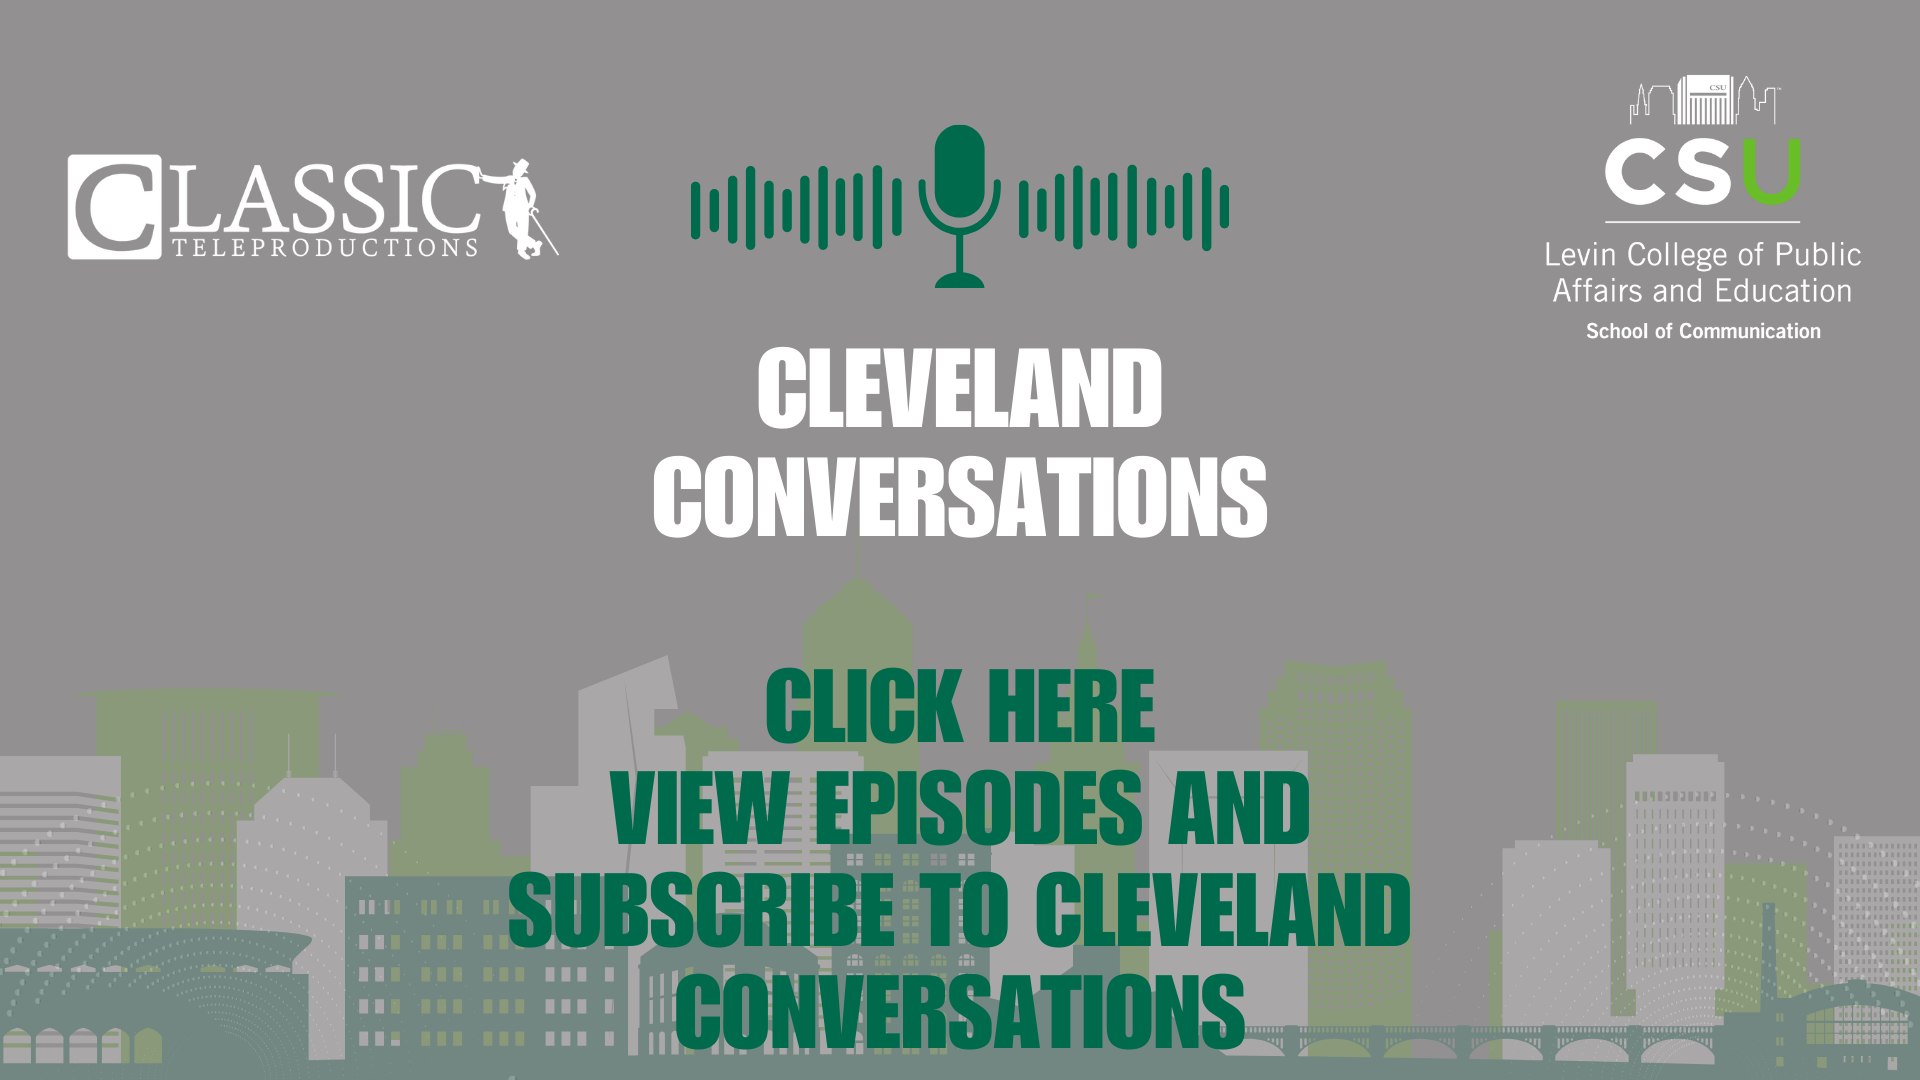 Click on the image to go to the Cleveland Conversations YouTube channel